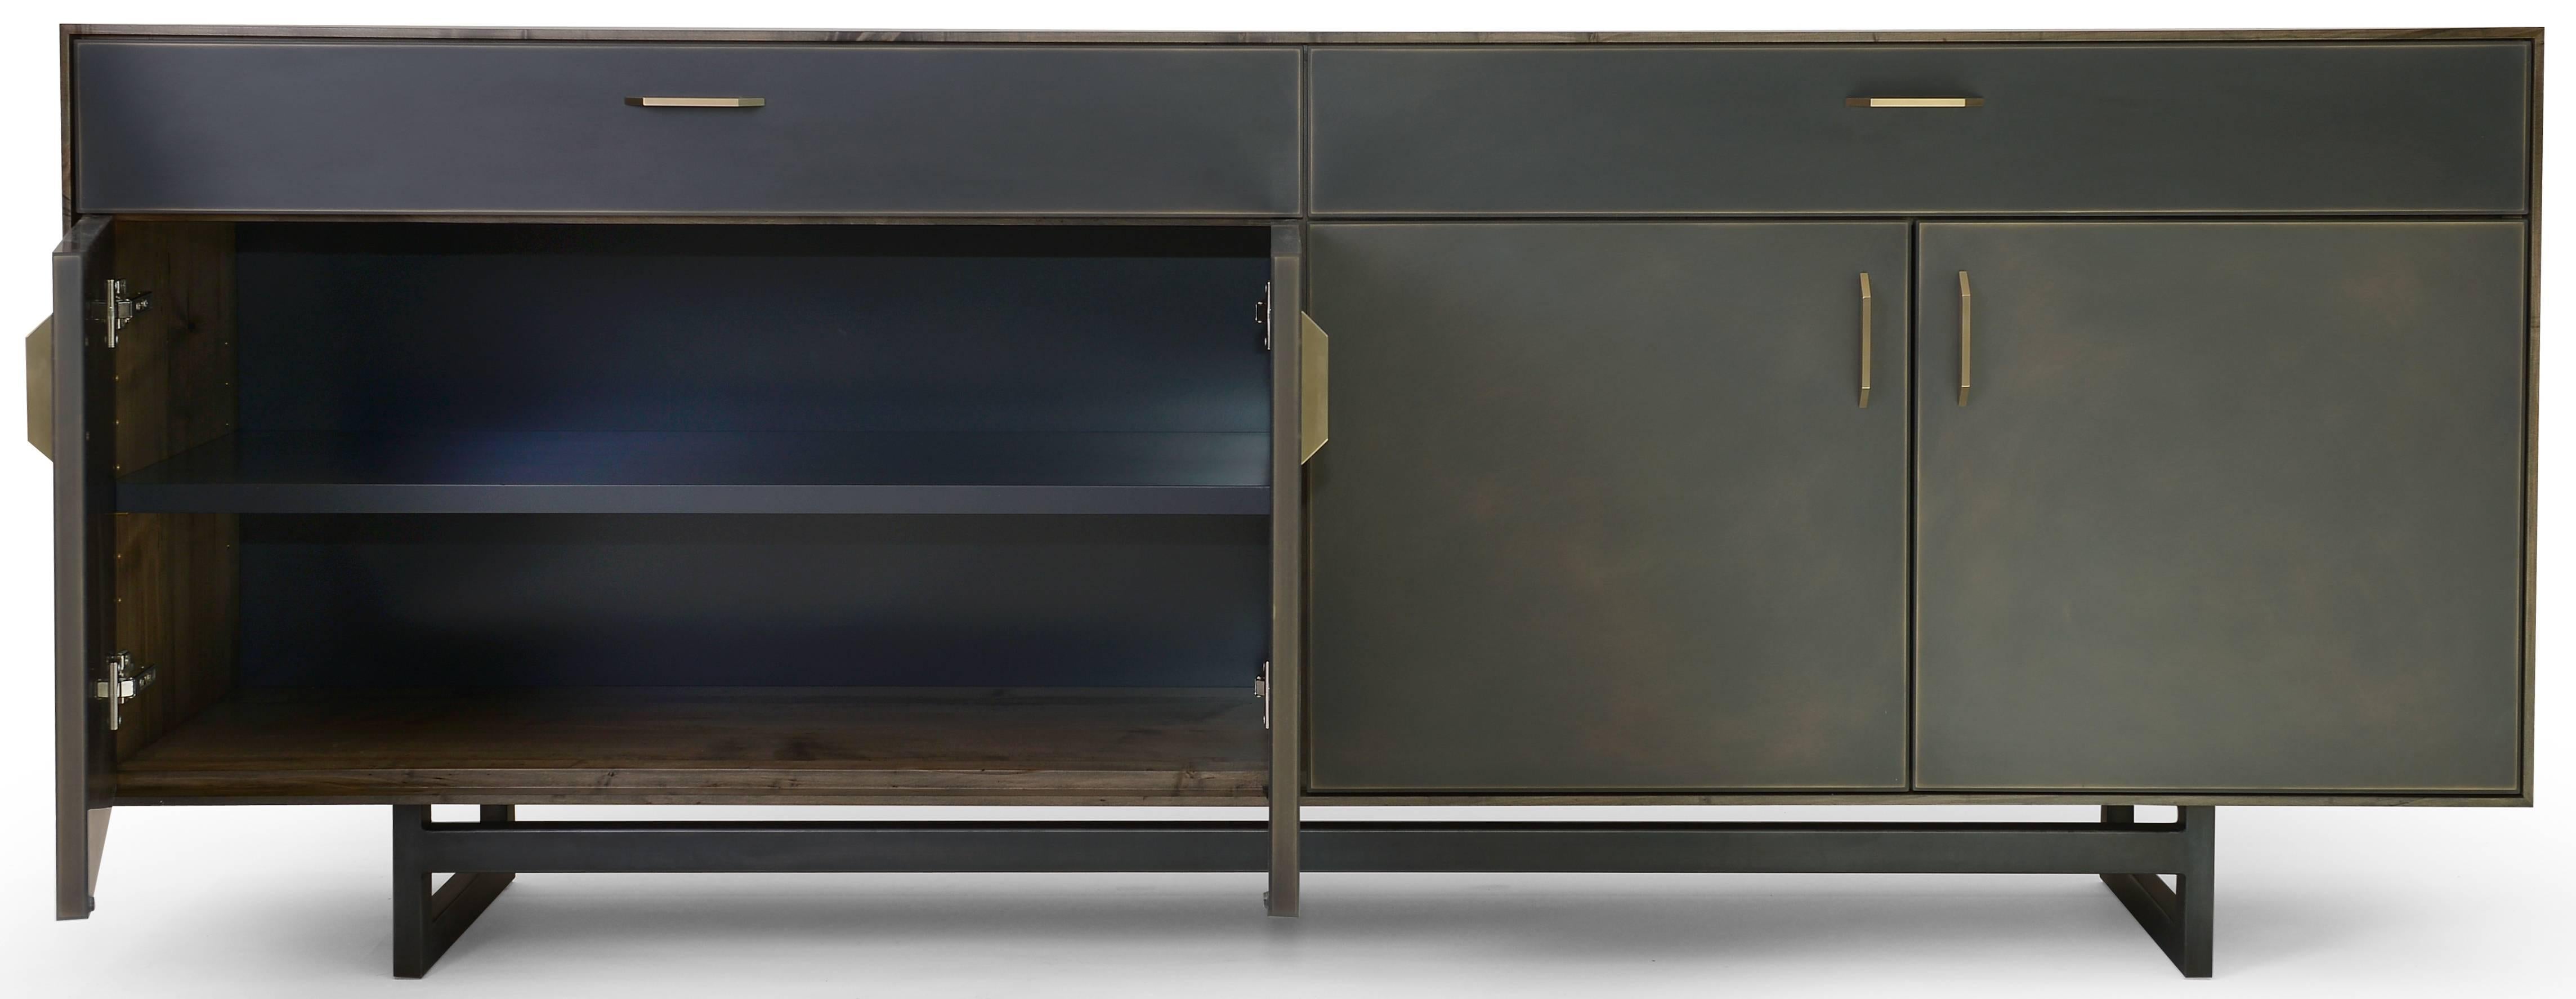 The Gotham credenza features clean lines that blend harmoniously with the beautiful mix of materials used in this collection. A delicate oxidized ambrosia maple frame sits on a blackened steel base with custom hand-sculpted bronze pulls on the